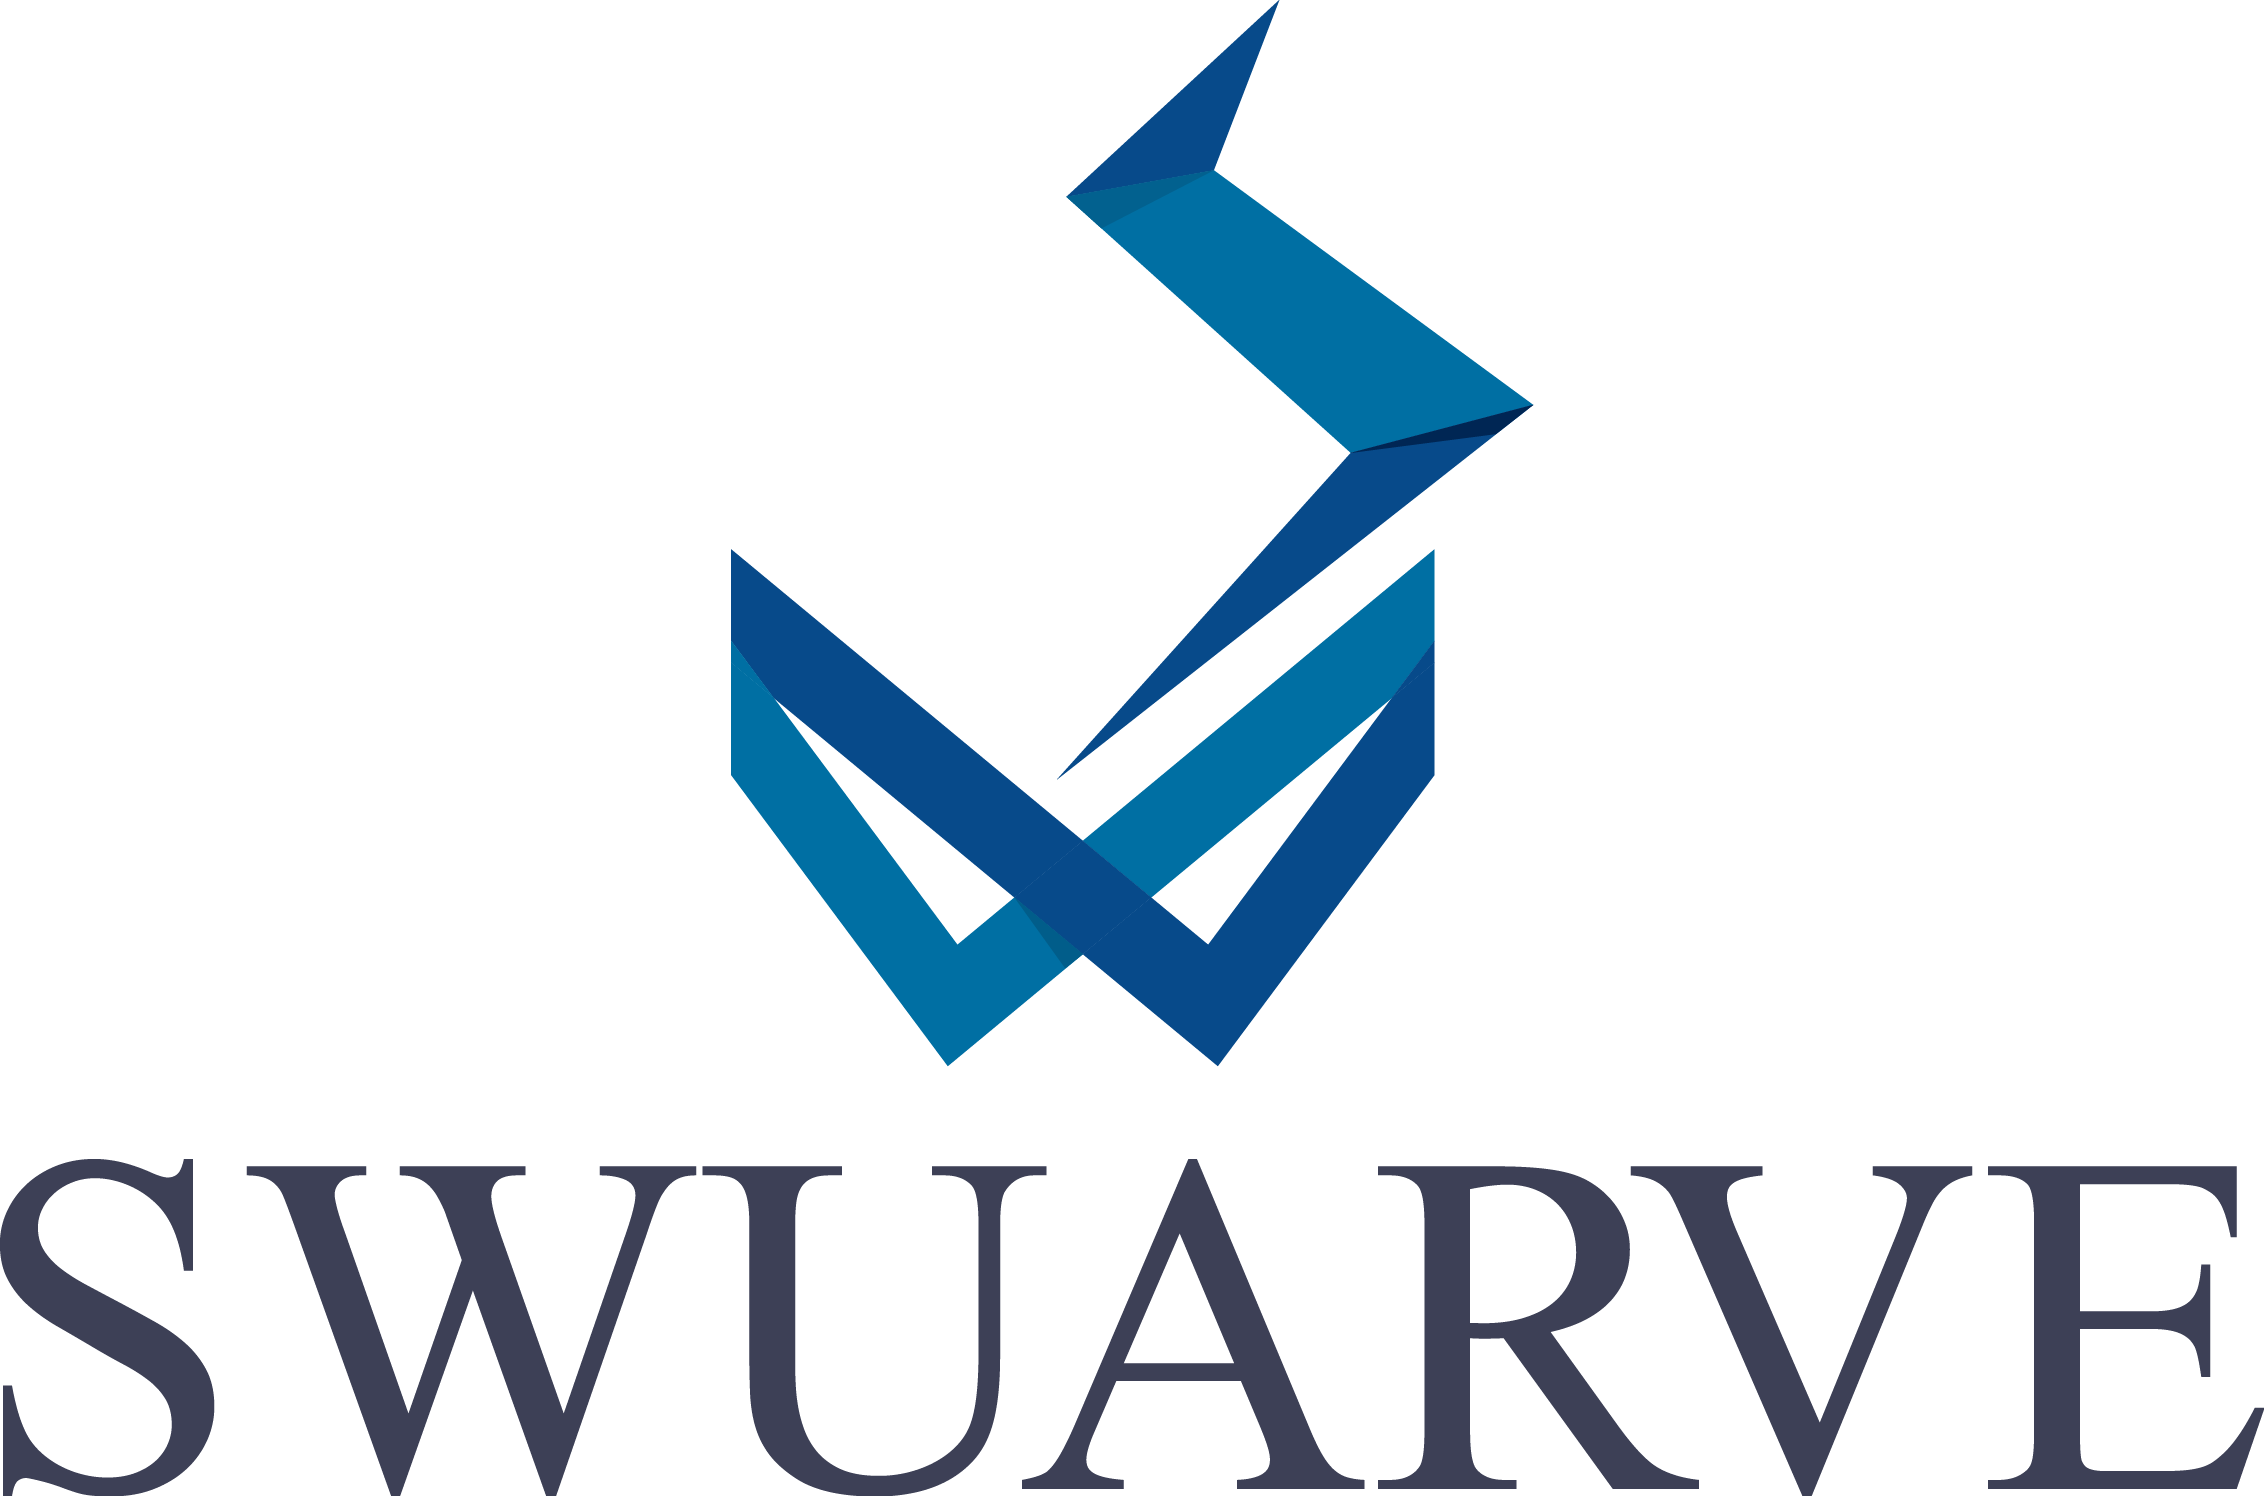 swuarve.com is for sale